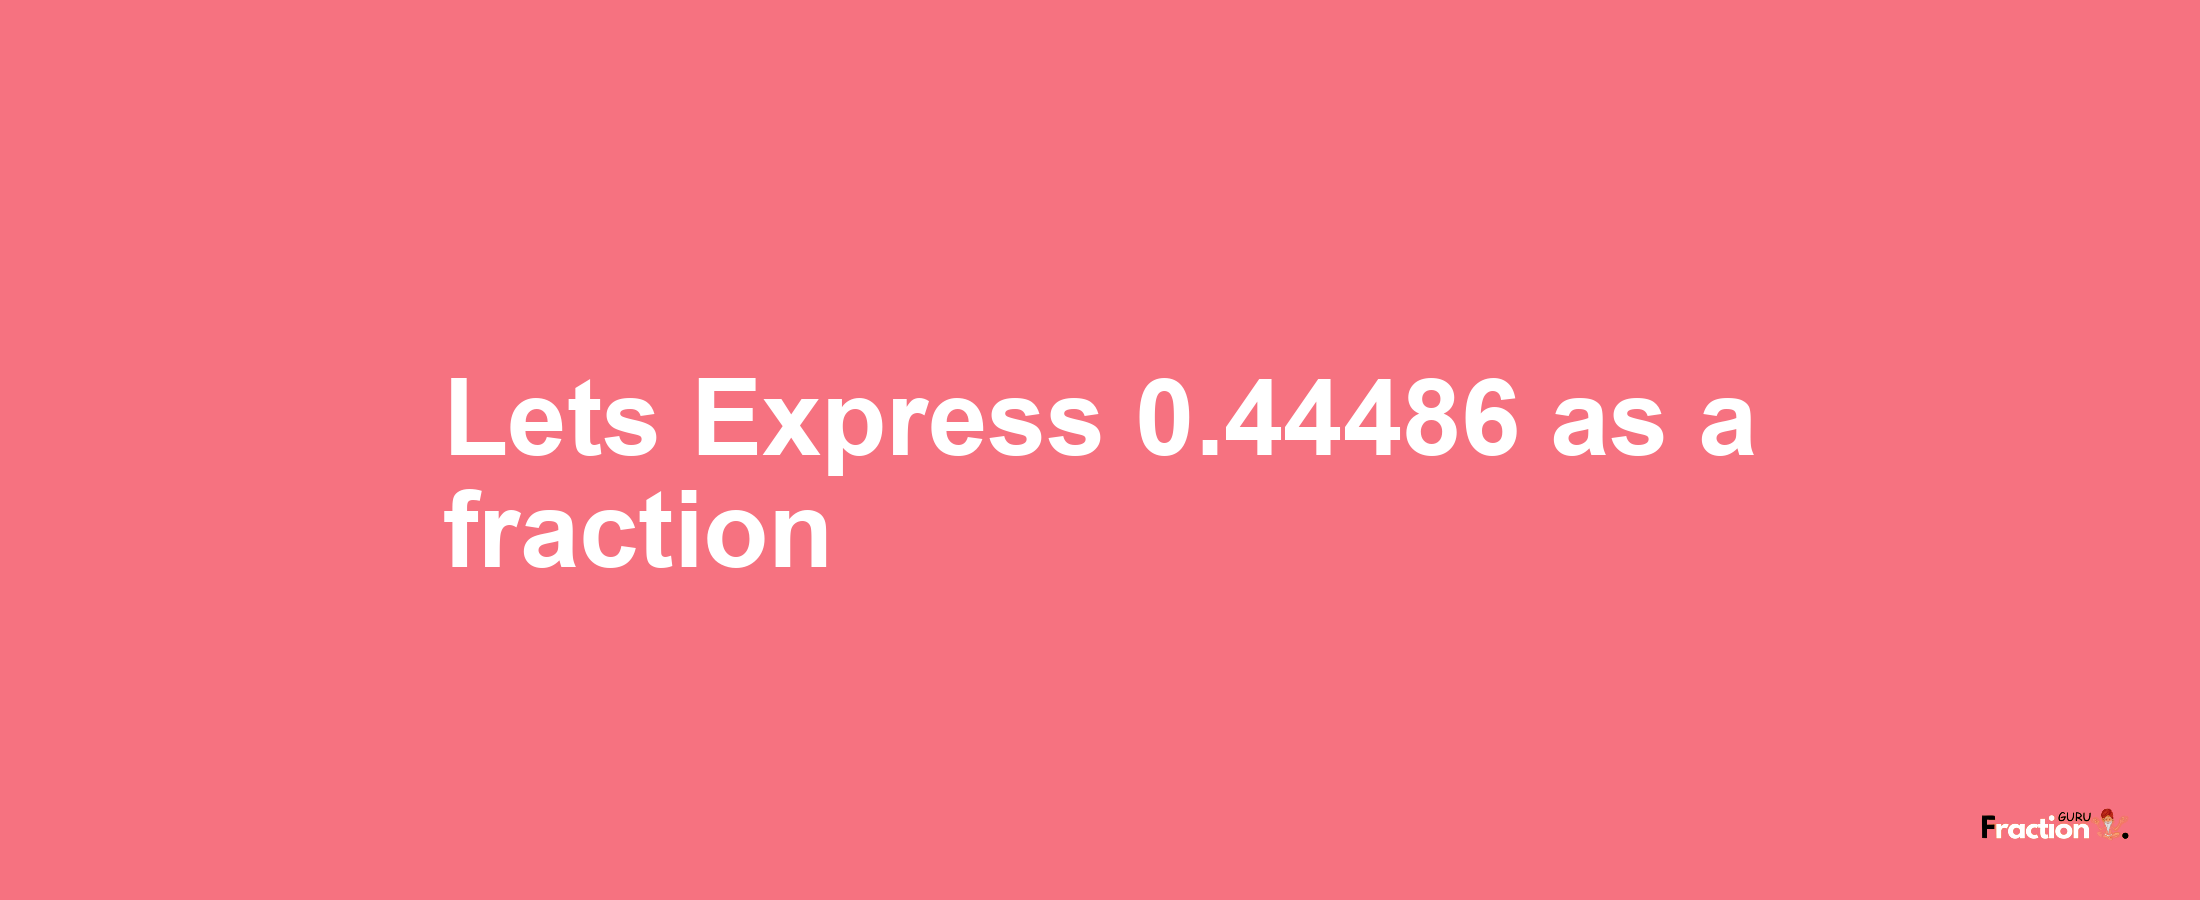 Lets Express 0.44486 as afraction